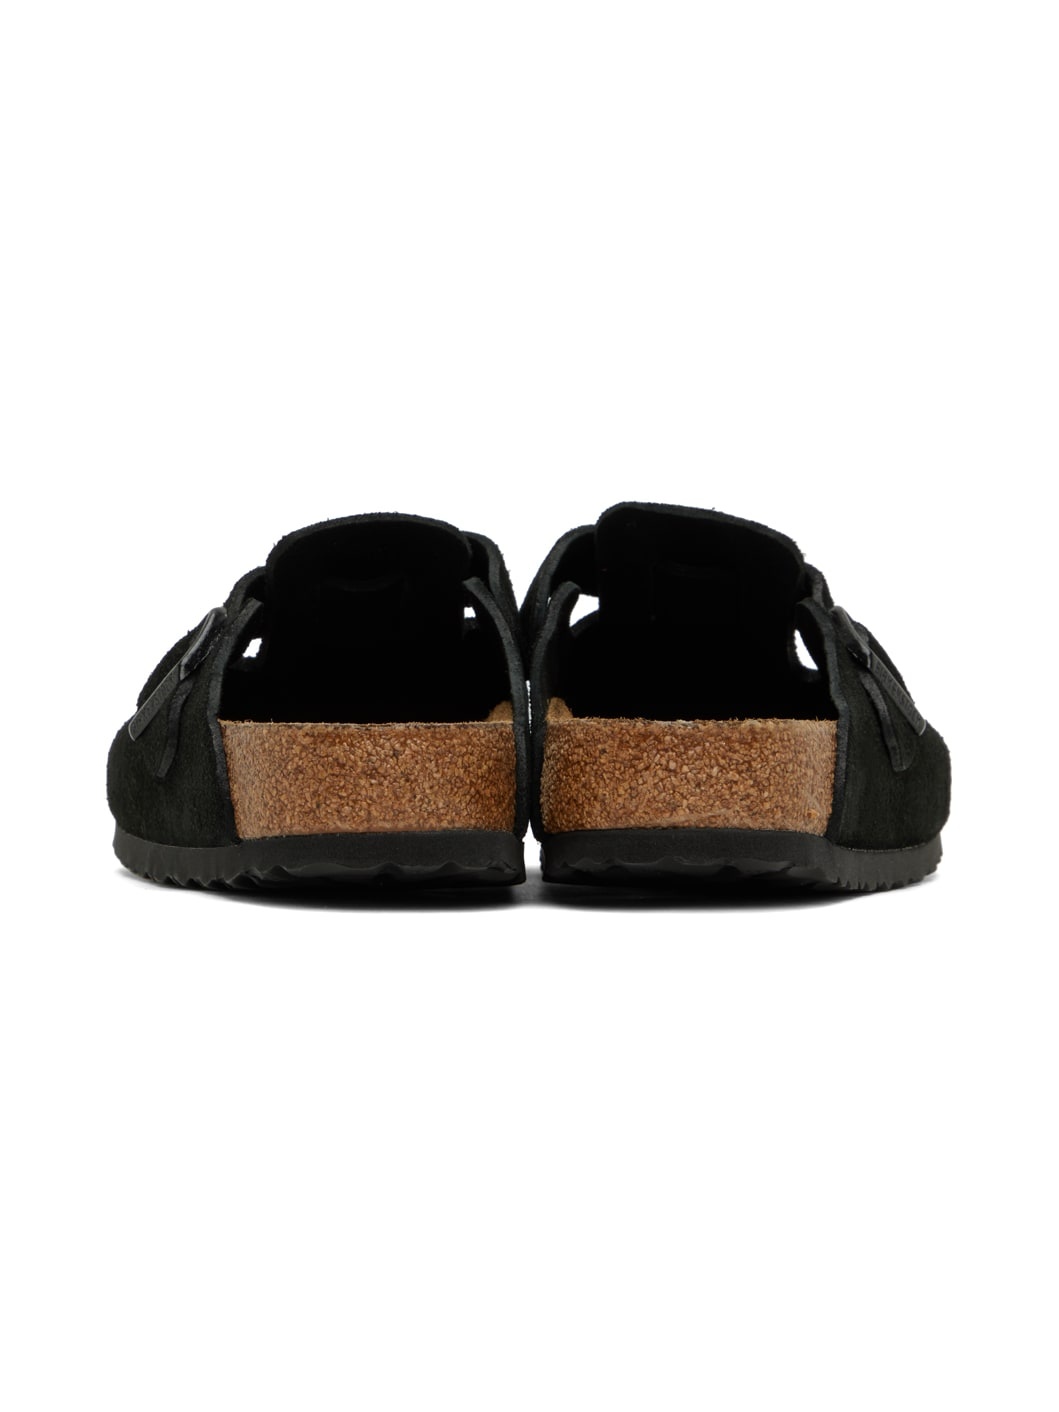 Black Boston Soft Footbed Loafers - 2